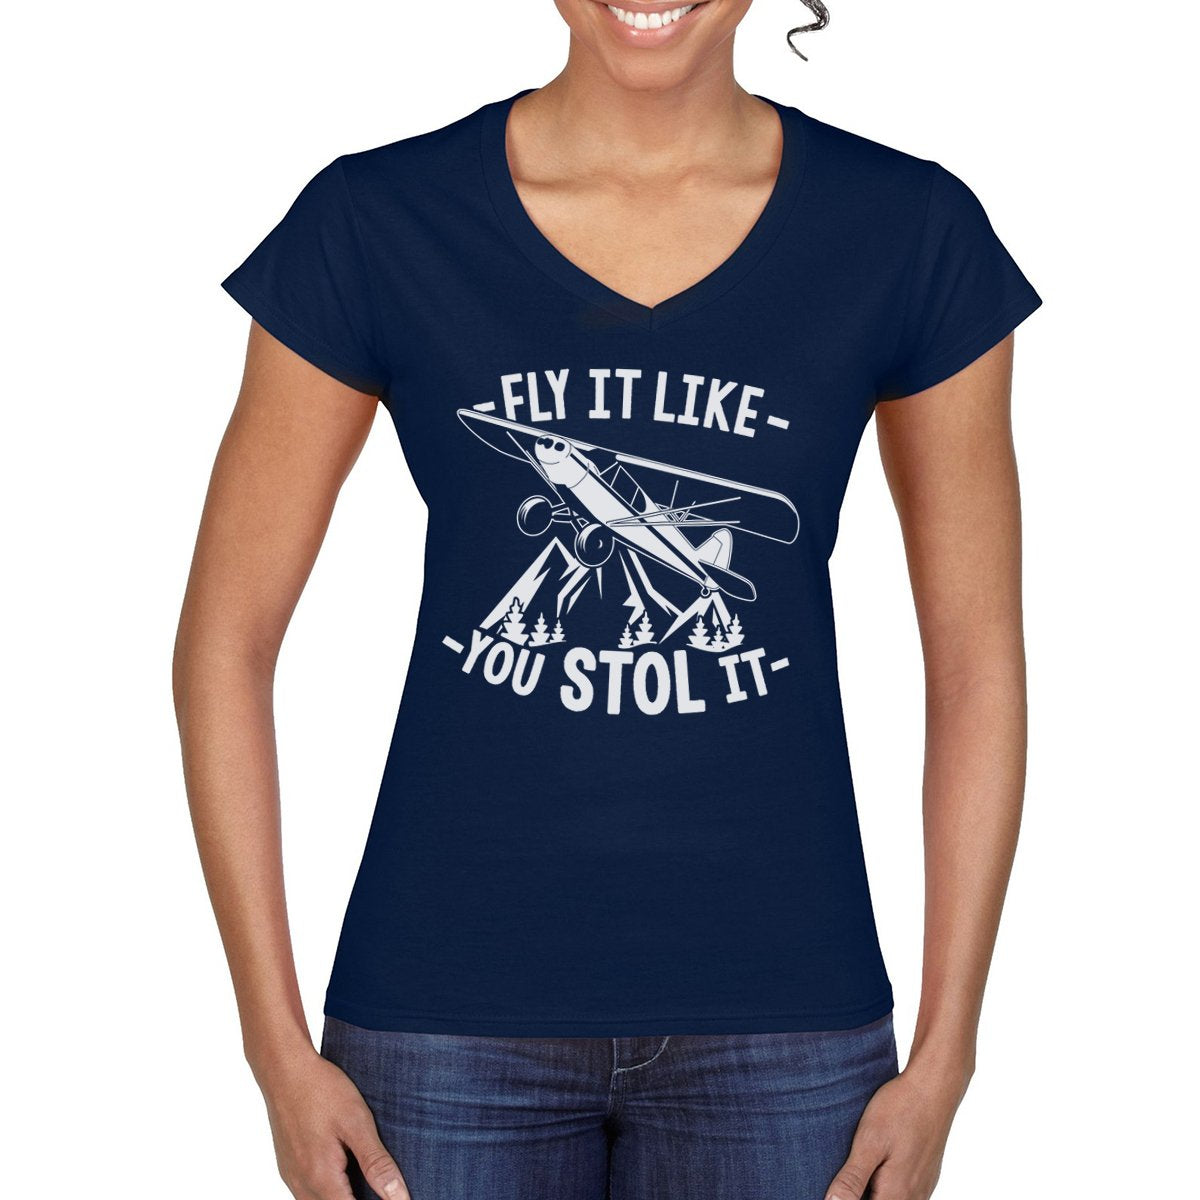 FLY IT LIKE YOU STOL IT Women's Semi-Fitted T-Shirt